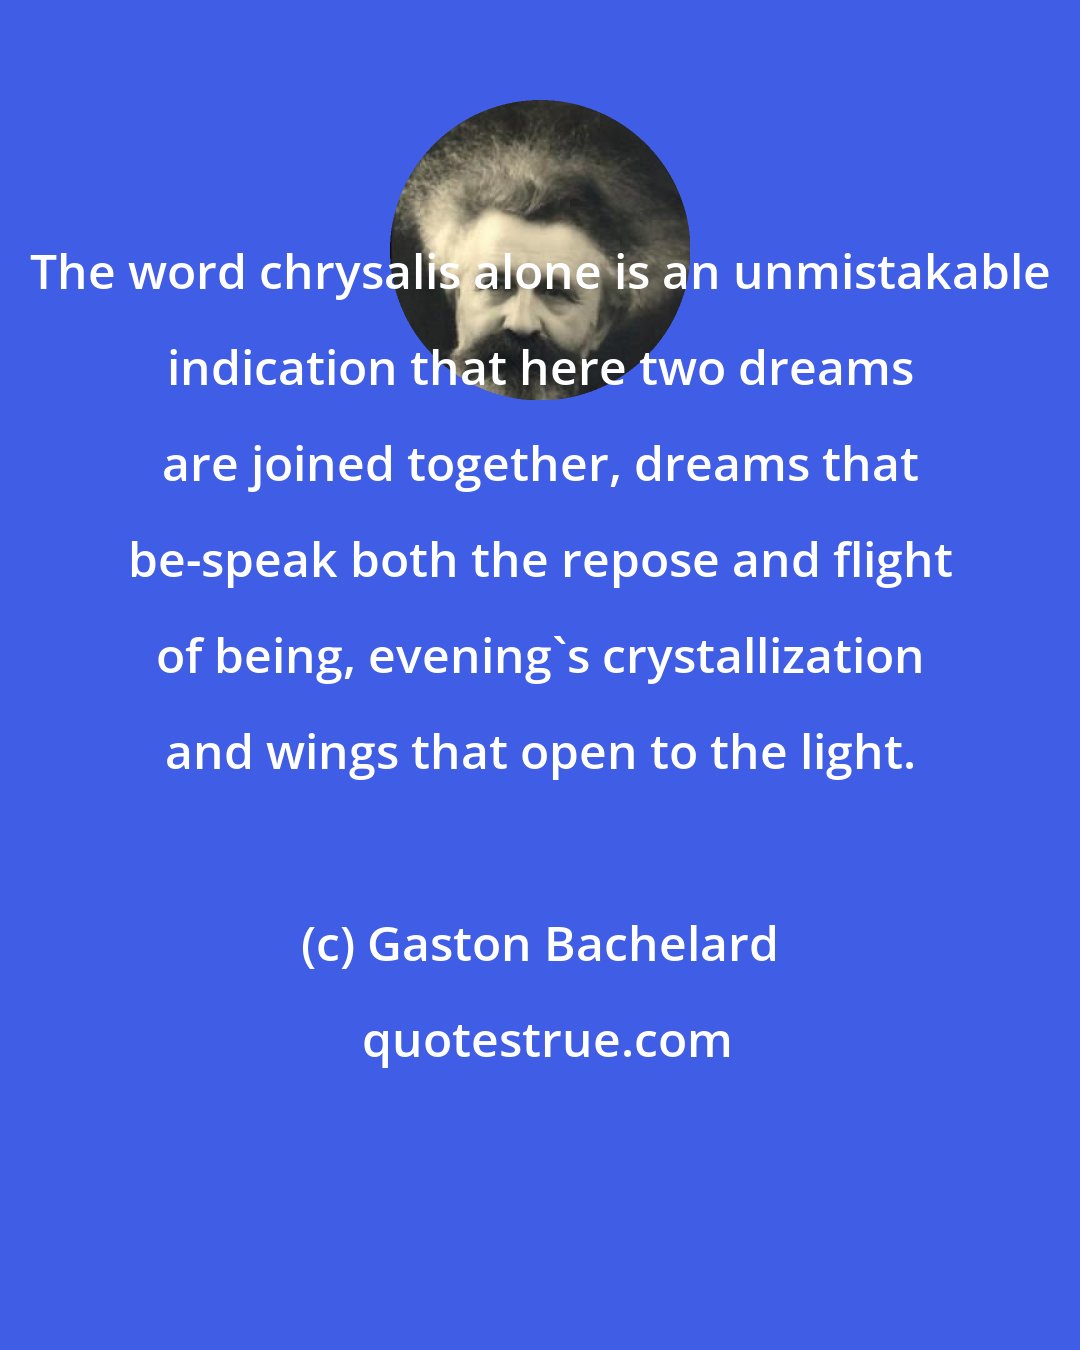 Gaston Bachelard: The word chrysalis alone is an unmistakable indication that here two dreams are joined together, dreams that be-speak both the repose and flight of being, evening's crystallization and wings that open to the light.